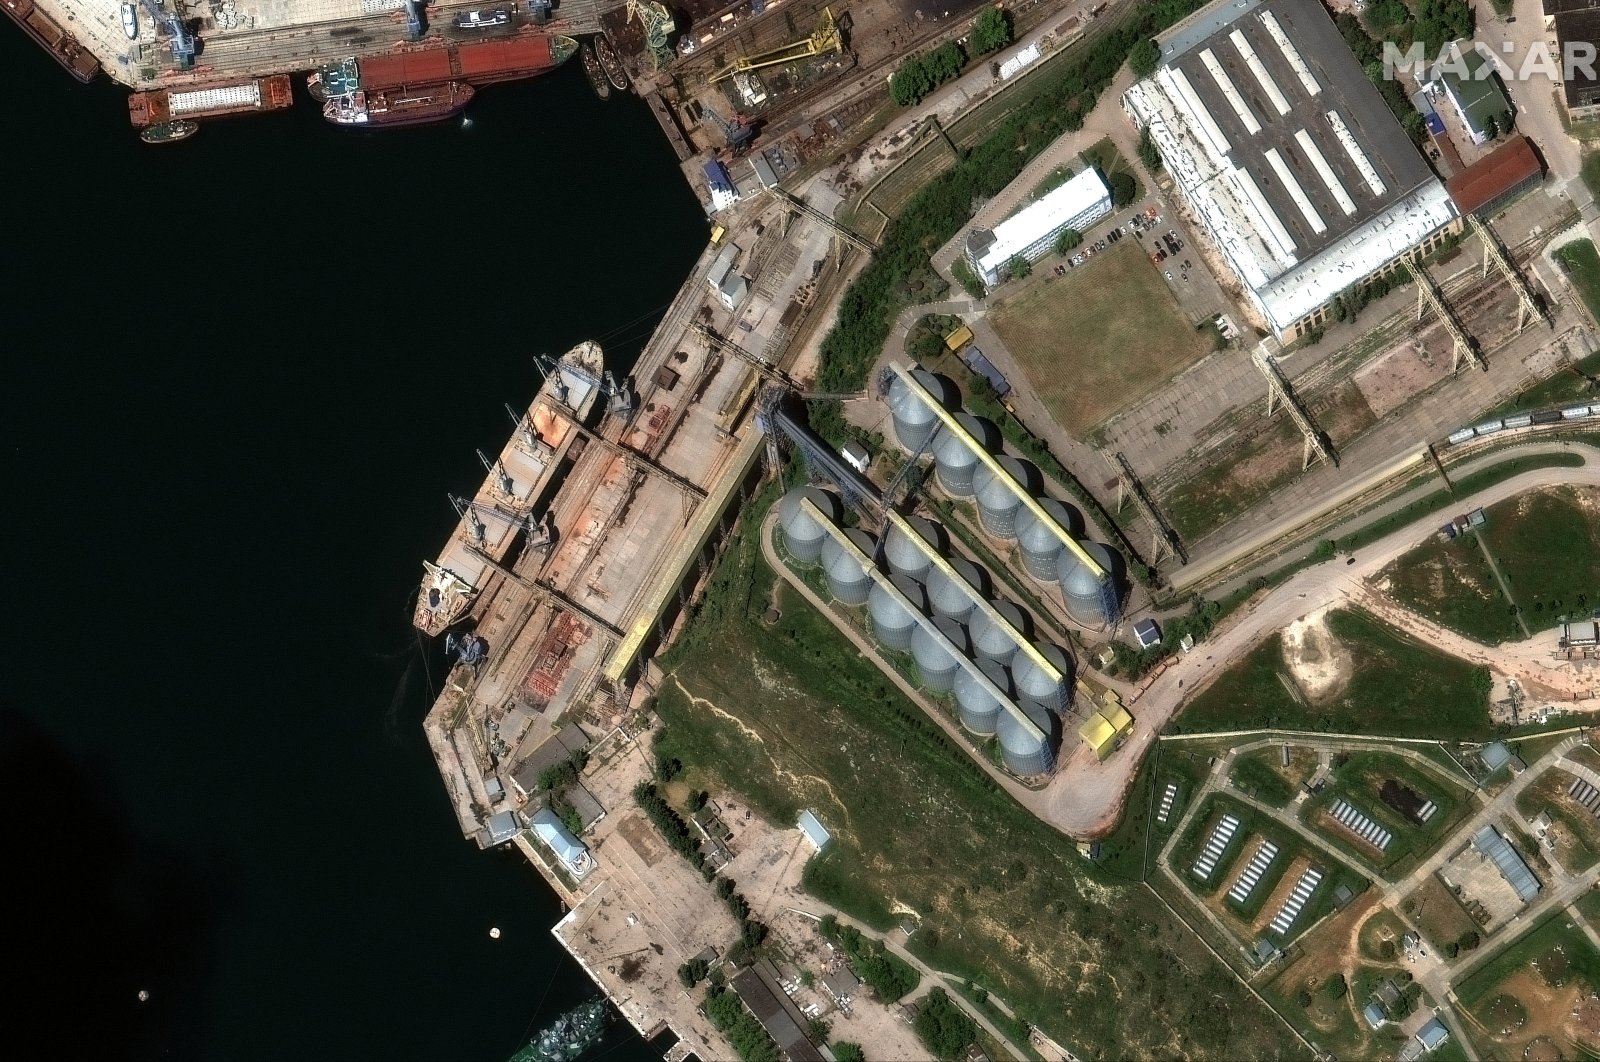 A satellite image shows an overview of a bulk carrier ship loading grain at the Ukrainian Black Sea port of Sevastopol, Ukraine, May 19, 2022. (Reuters Photo)